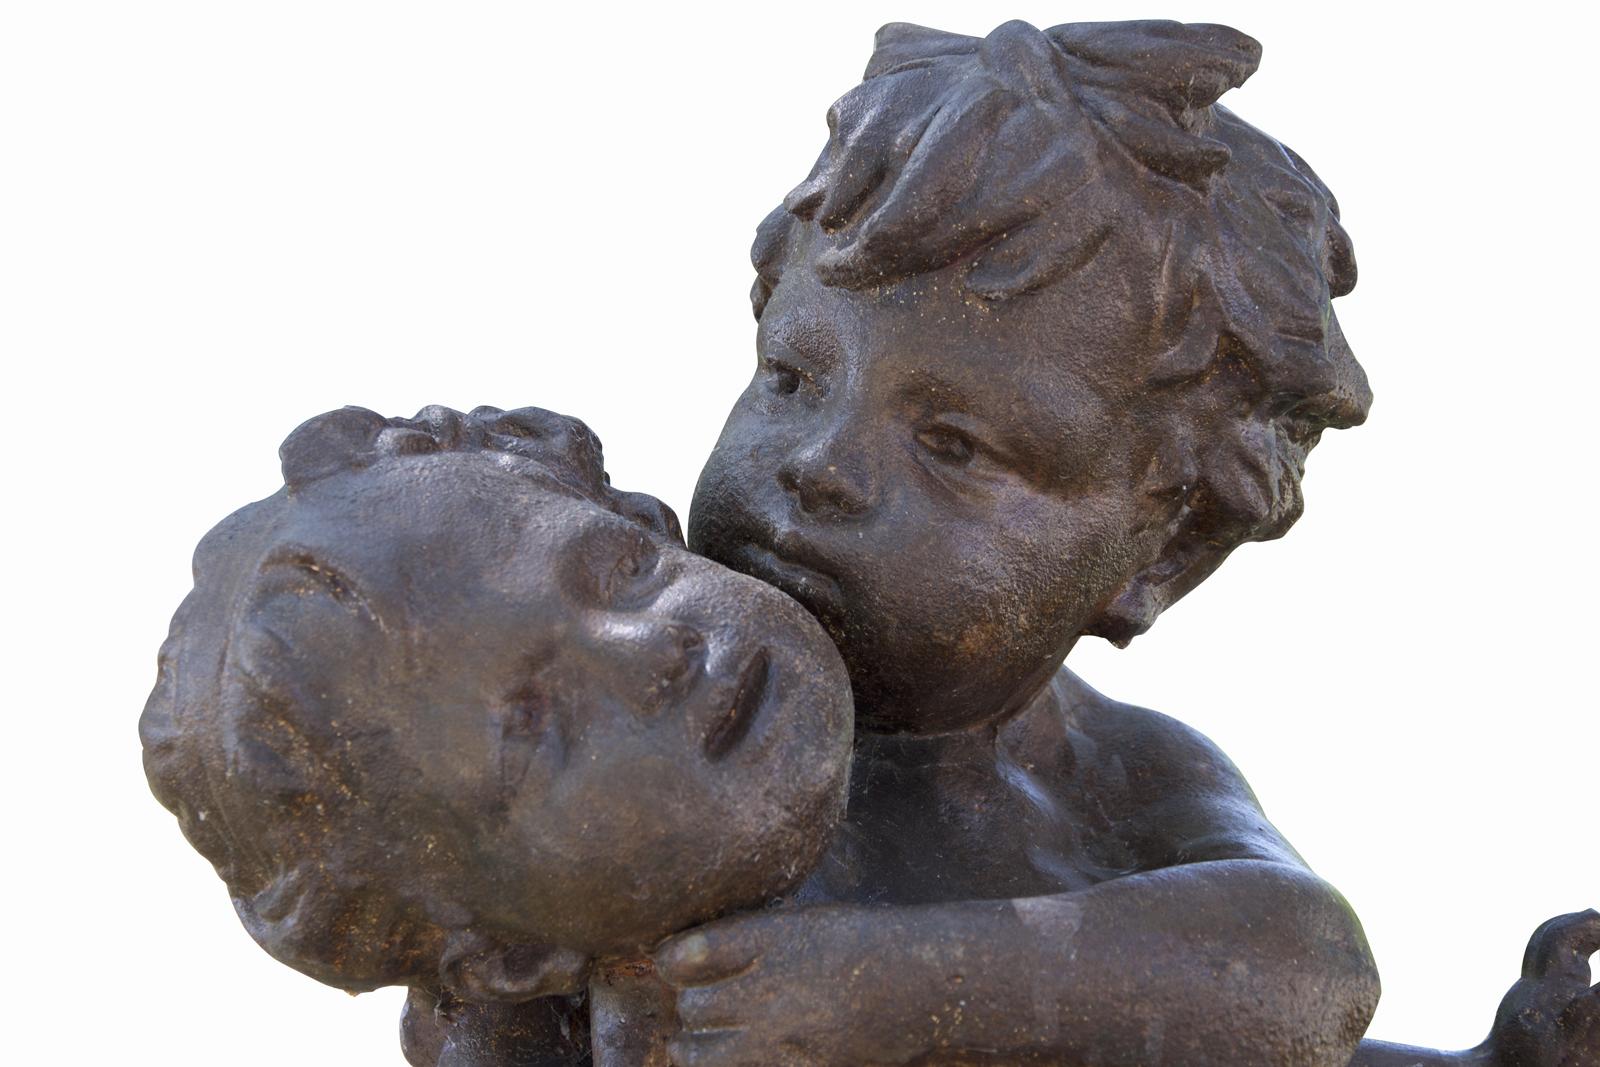 Dating from the 19th century, group of love intertwined cast iron. This group is composed of a young boy and a girl intertwined. They are surrounded by an antique drapery as well as a vegetal decoration.

The model comes from the Salin smelter